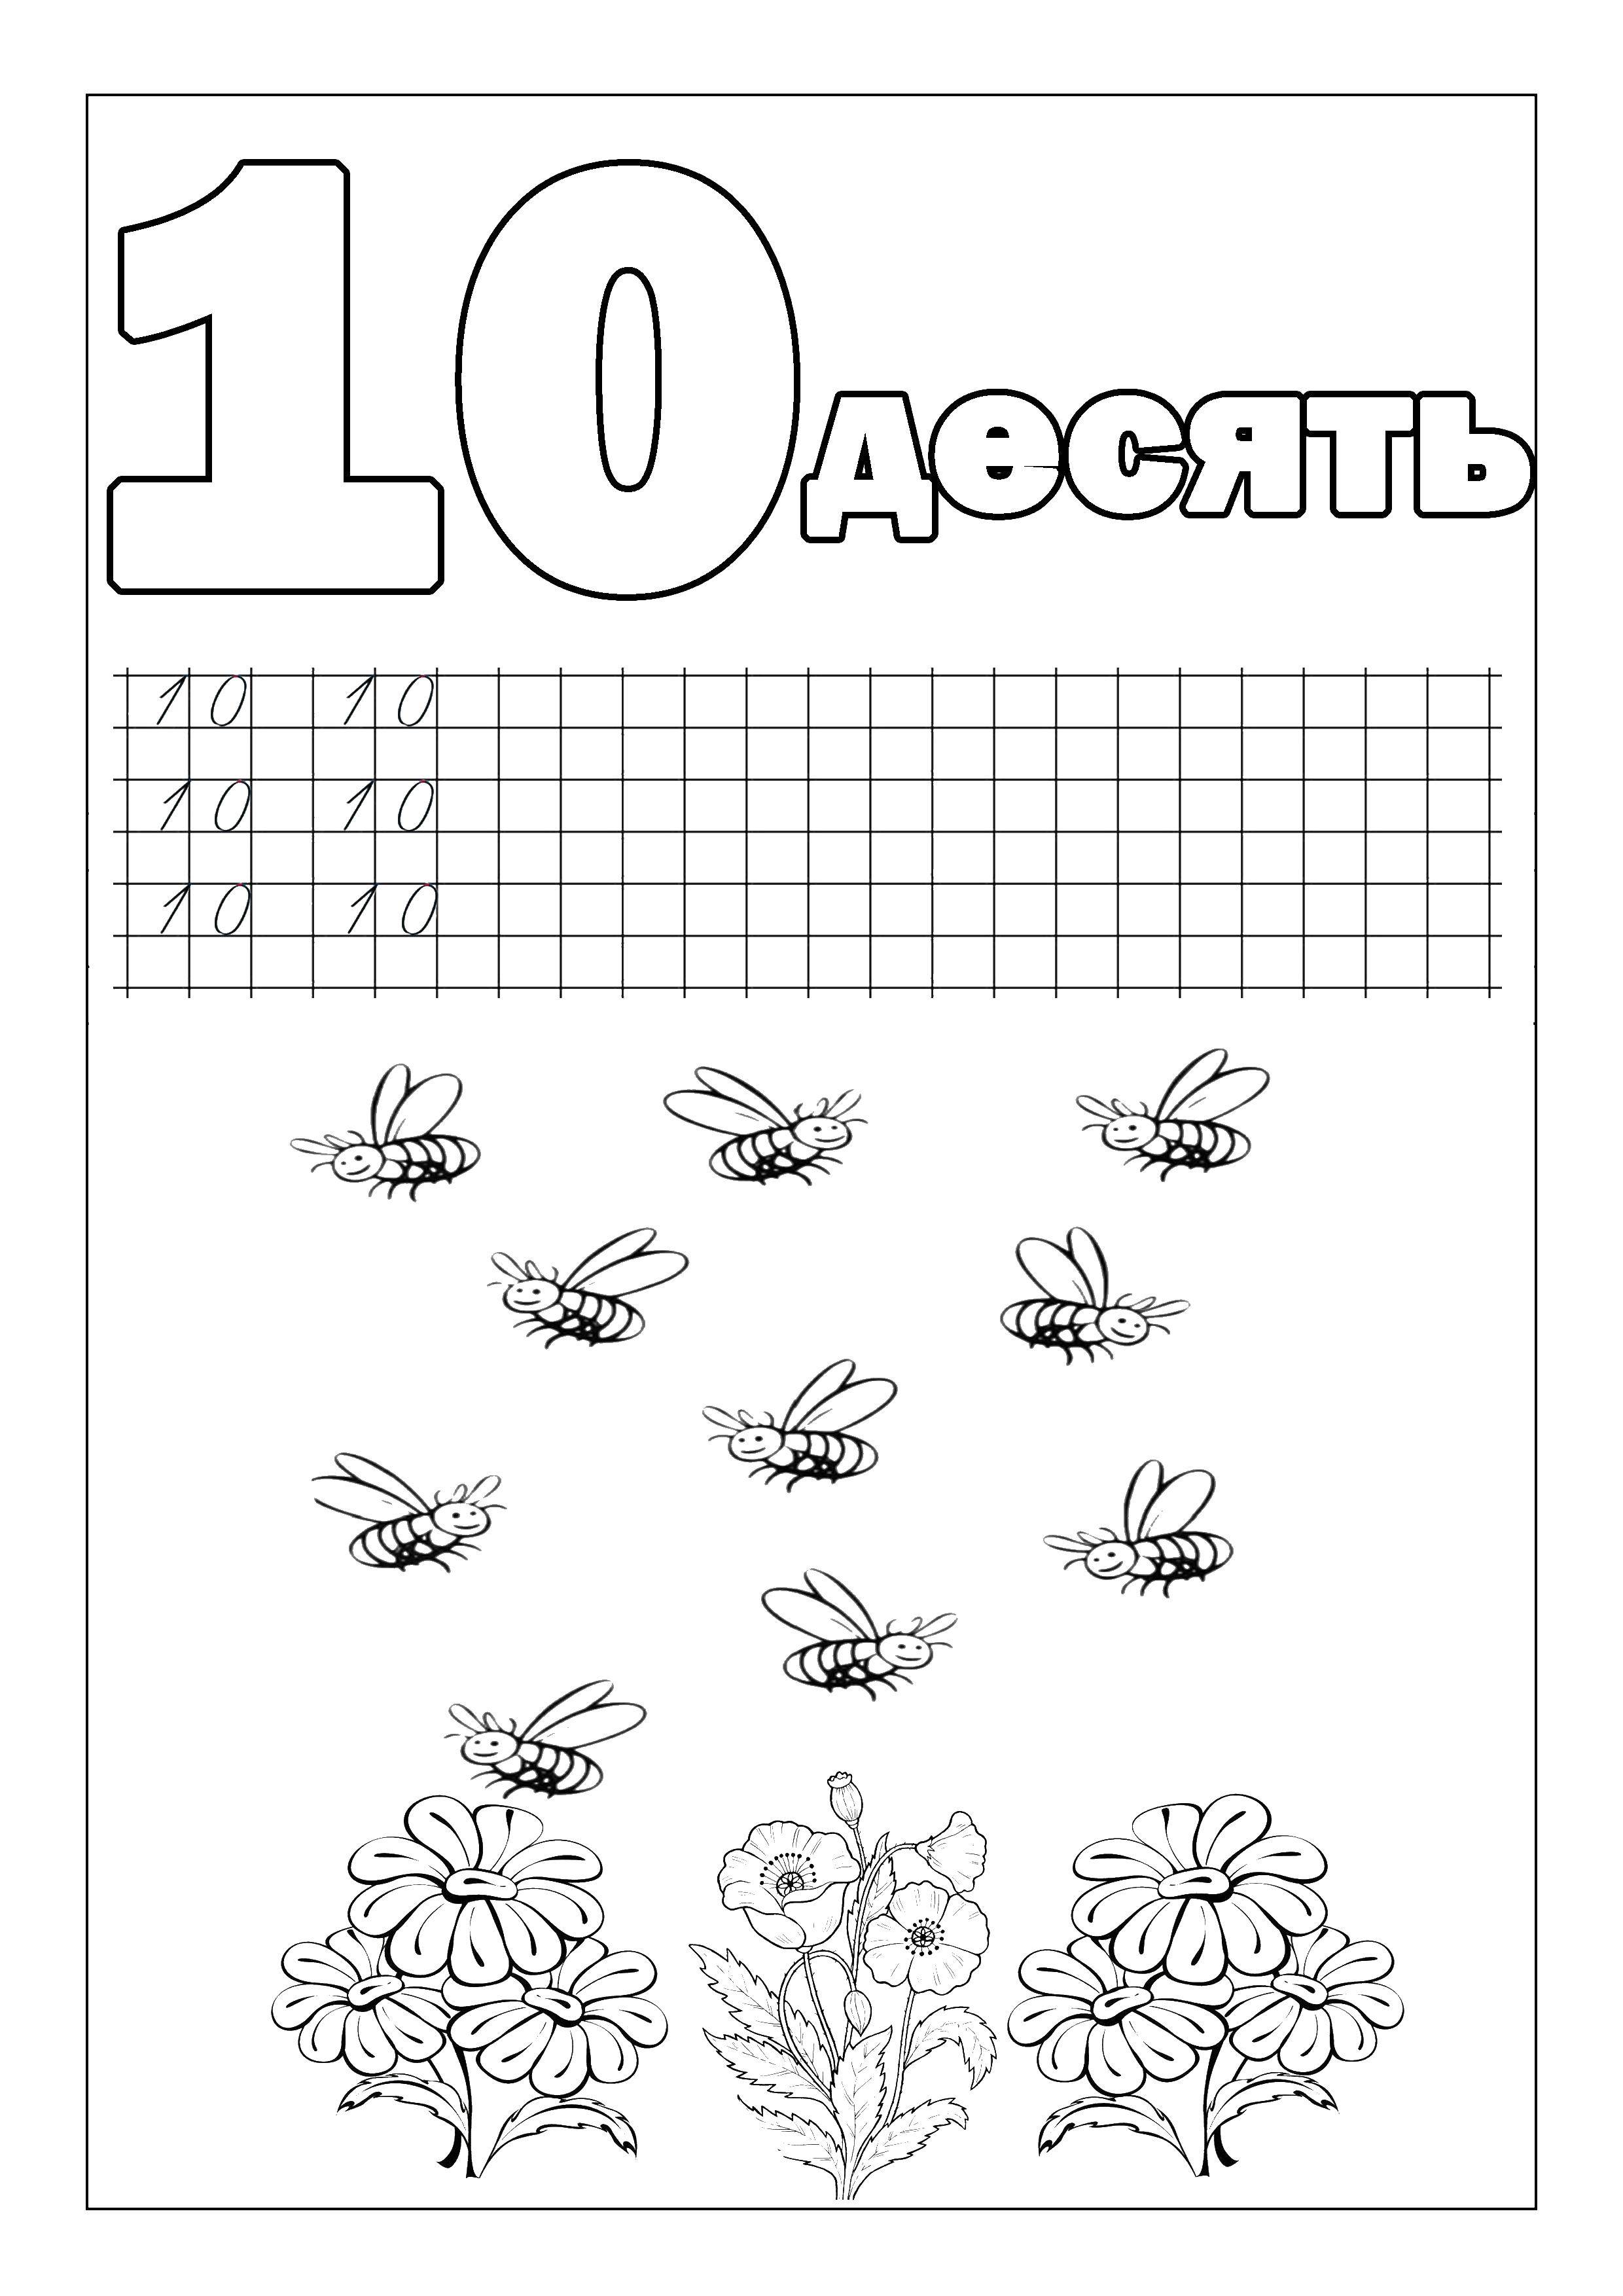 Coloring Recipe numeral 10. Category tracing numbers. Tags:  recipe, 10, digits, bee.